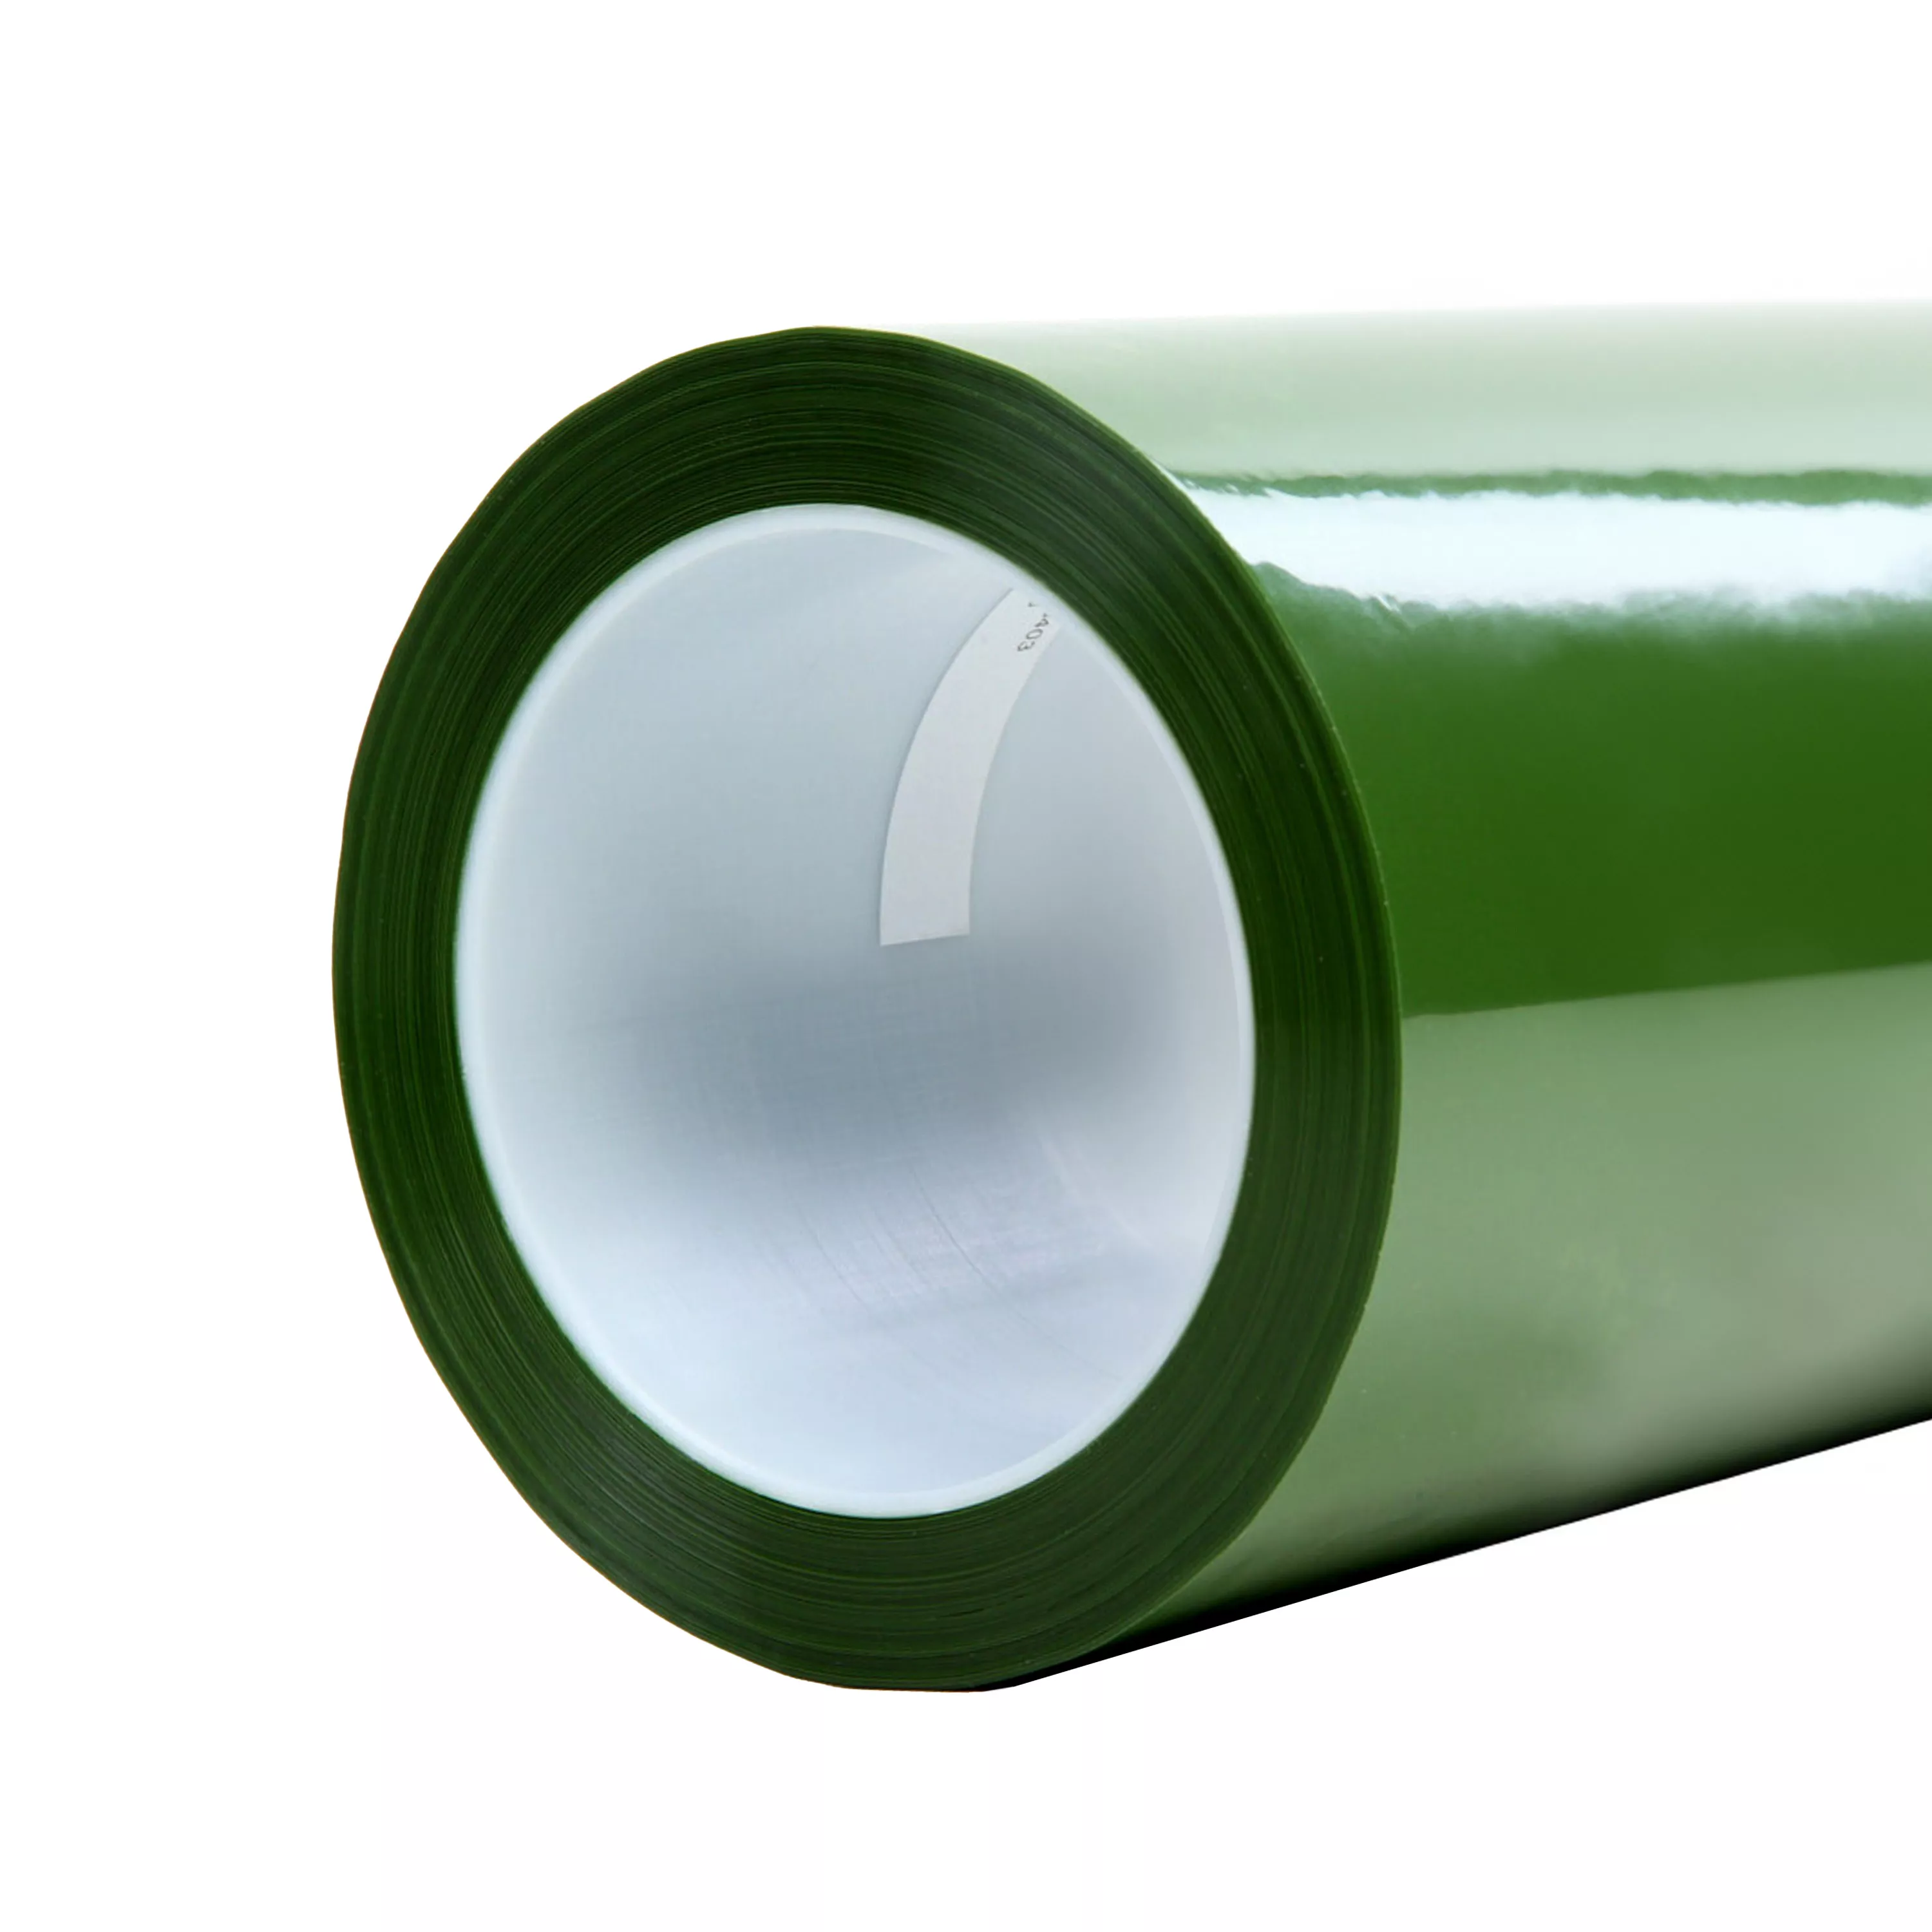 3M™ Polyester Tape 8403, Green, 36 in x 72 yd, 2.4 mil, 1 Roll/Case